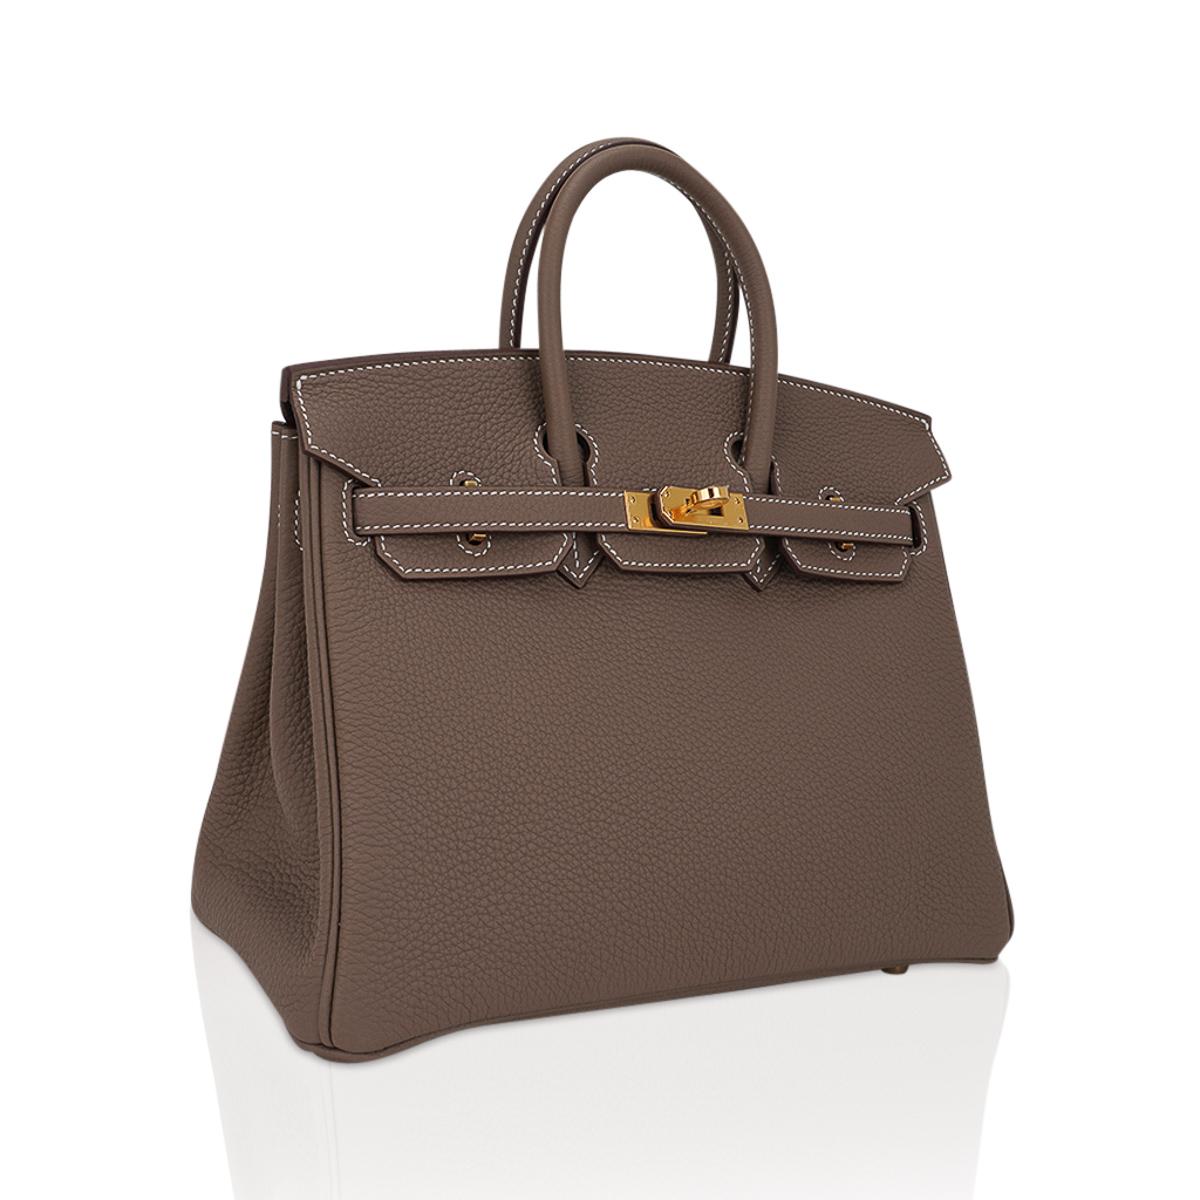 Mightychic offers an Hermes Birkin 25 bag featured in coveted neutral Etoupe. 
Signature bone top stitch detail. 
Lush Togo leather is supple and scratch resistant.
Rich with gold hardware.
Comes with lock, keys, clochette, sleepers, raincoat,